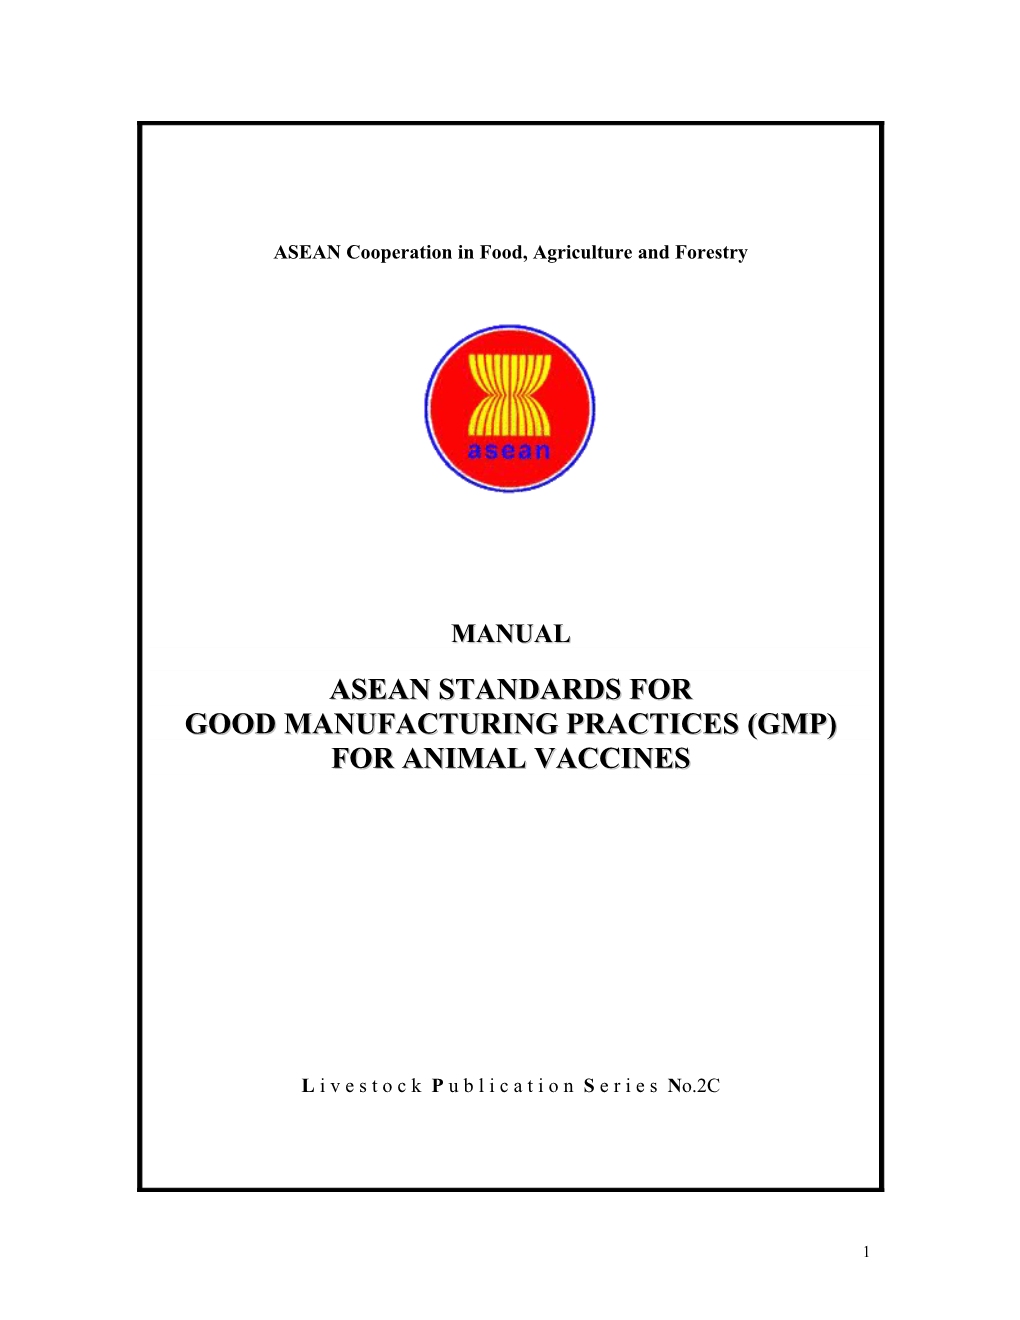 Manual of Asean Standards For